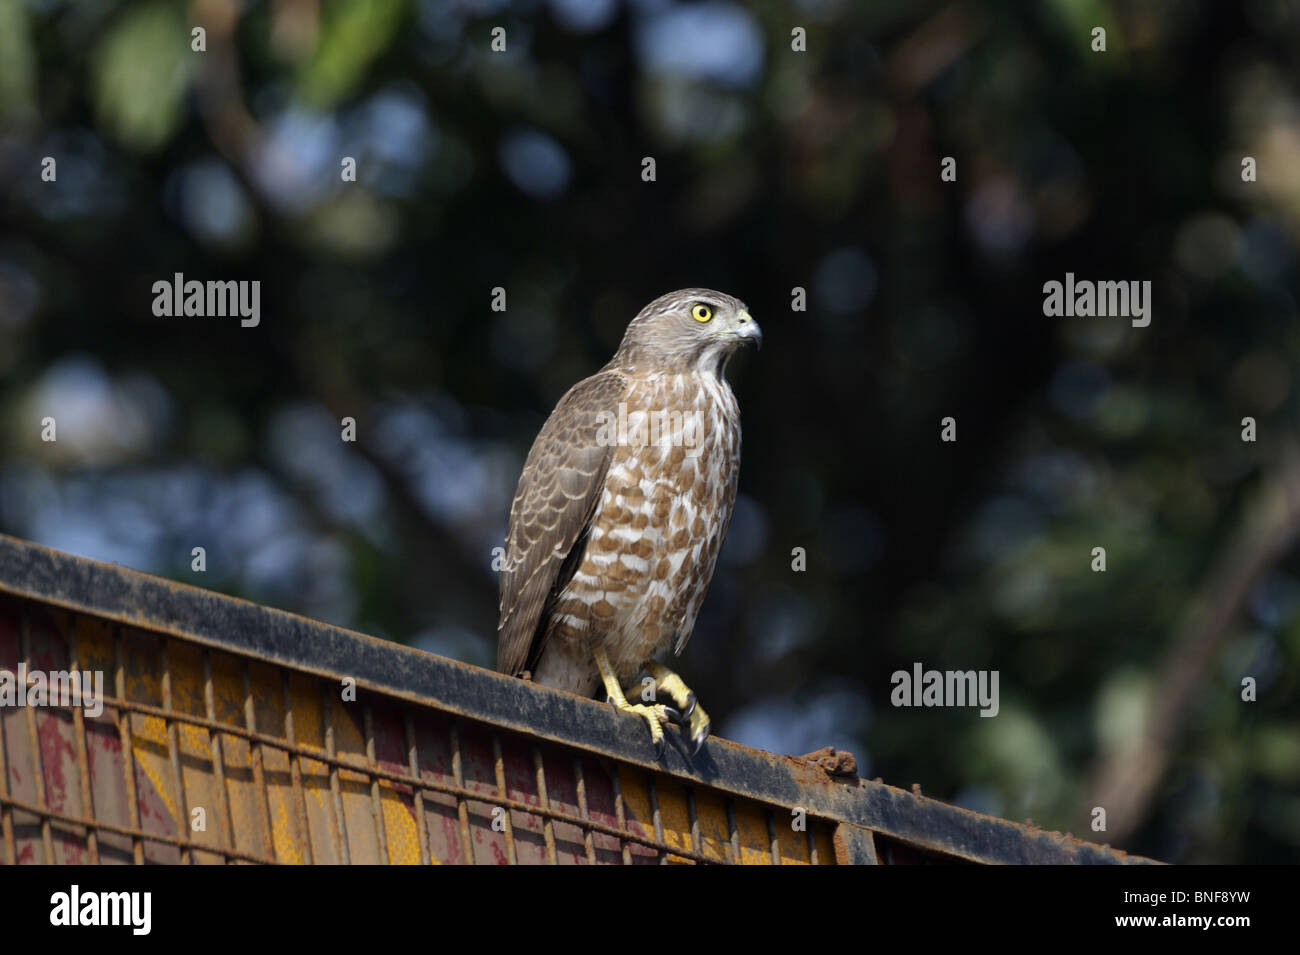 Shikra or Little Banded Goshawk (Accipiter badius) small bird of prey. The adult Shikra has pale grey upperparts and is white, Stock Photo